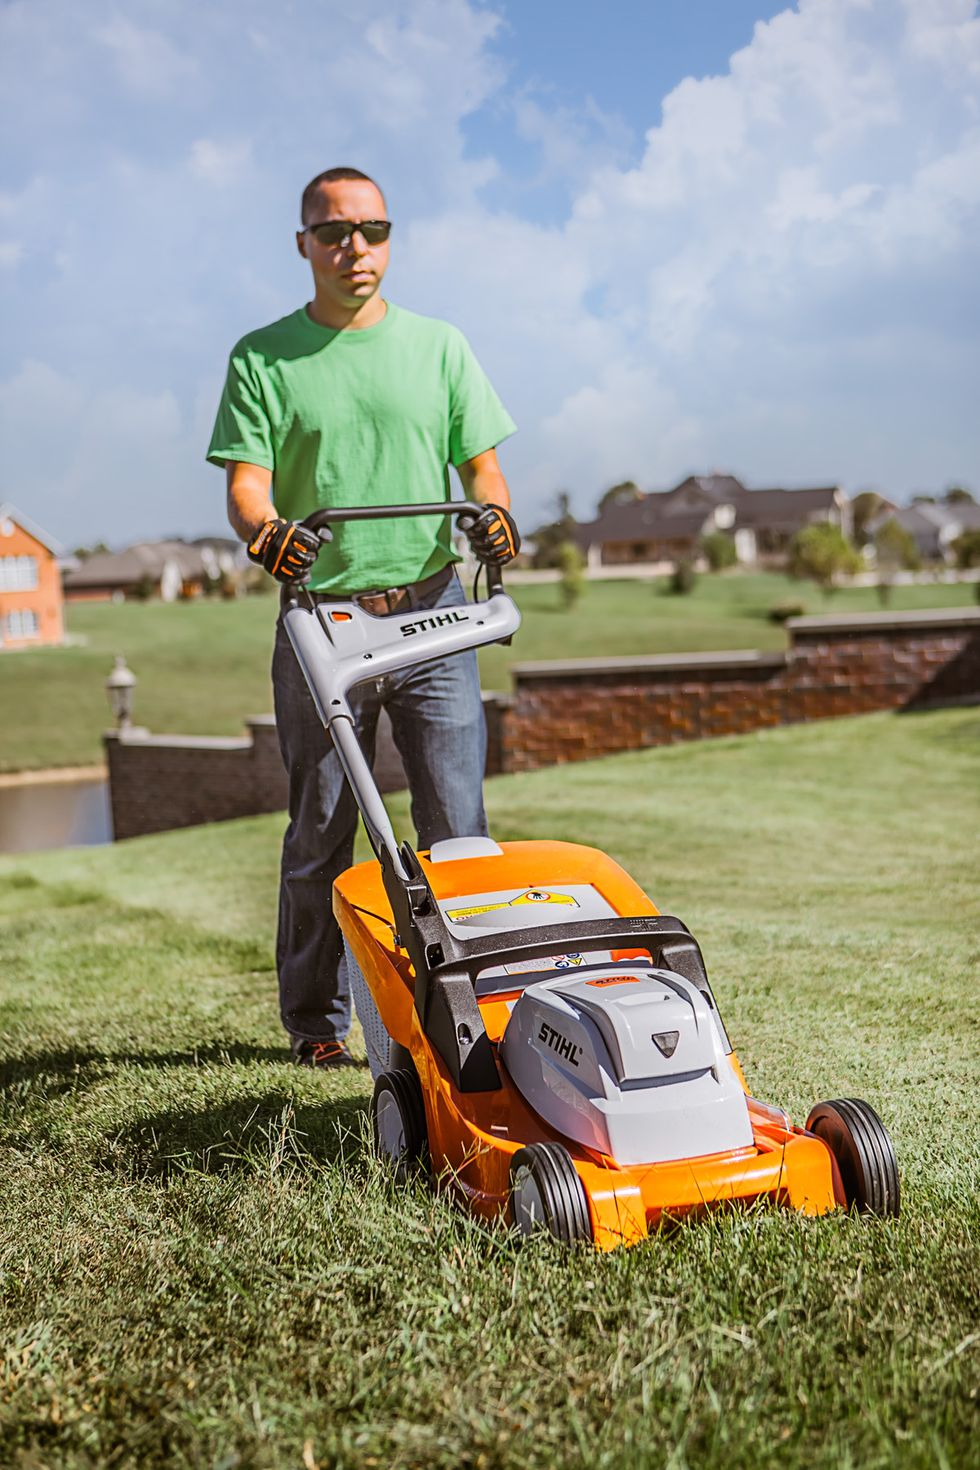 Stihl Releases a Battery Powered Lawn Mower Packing Plenty of Power